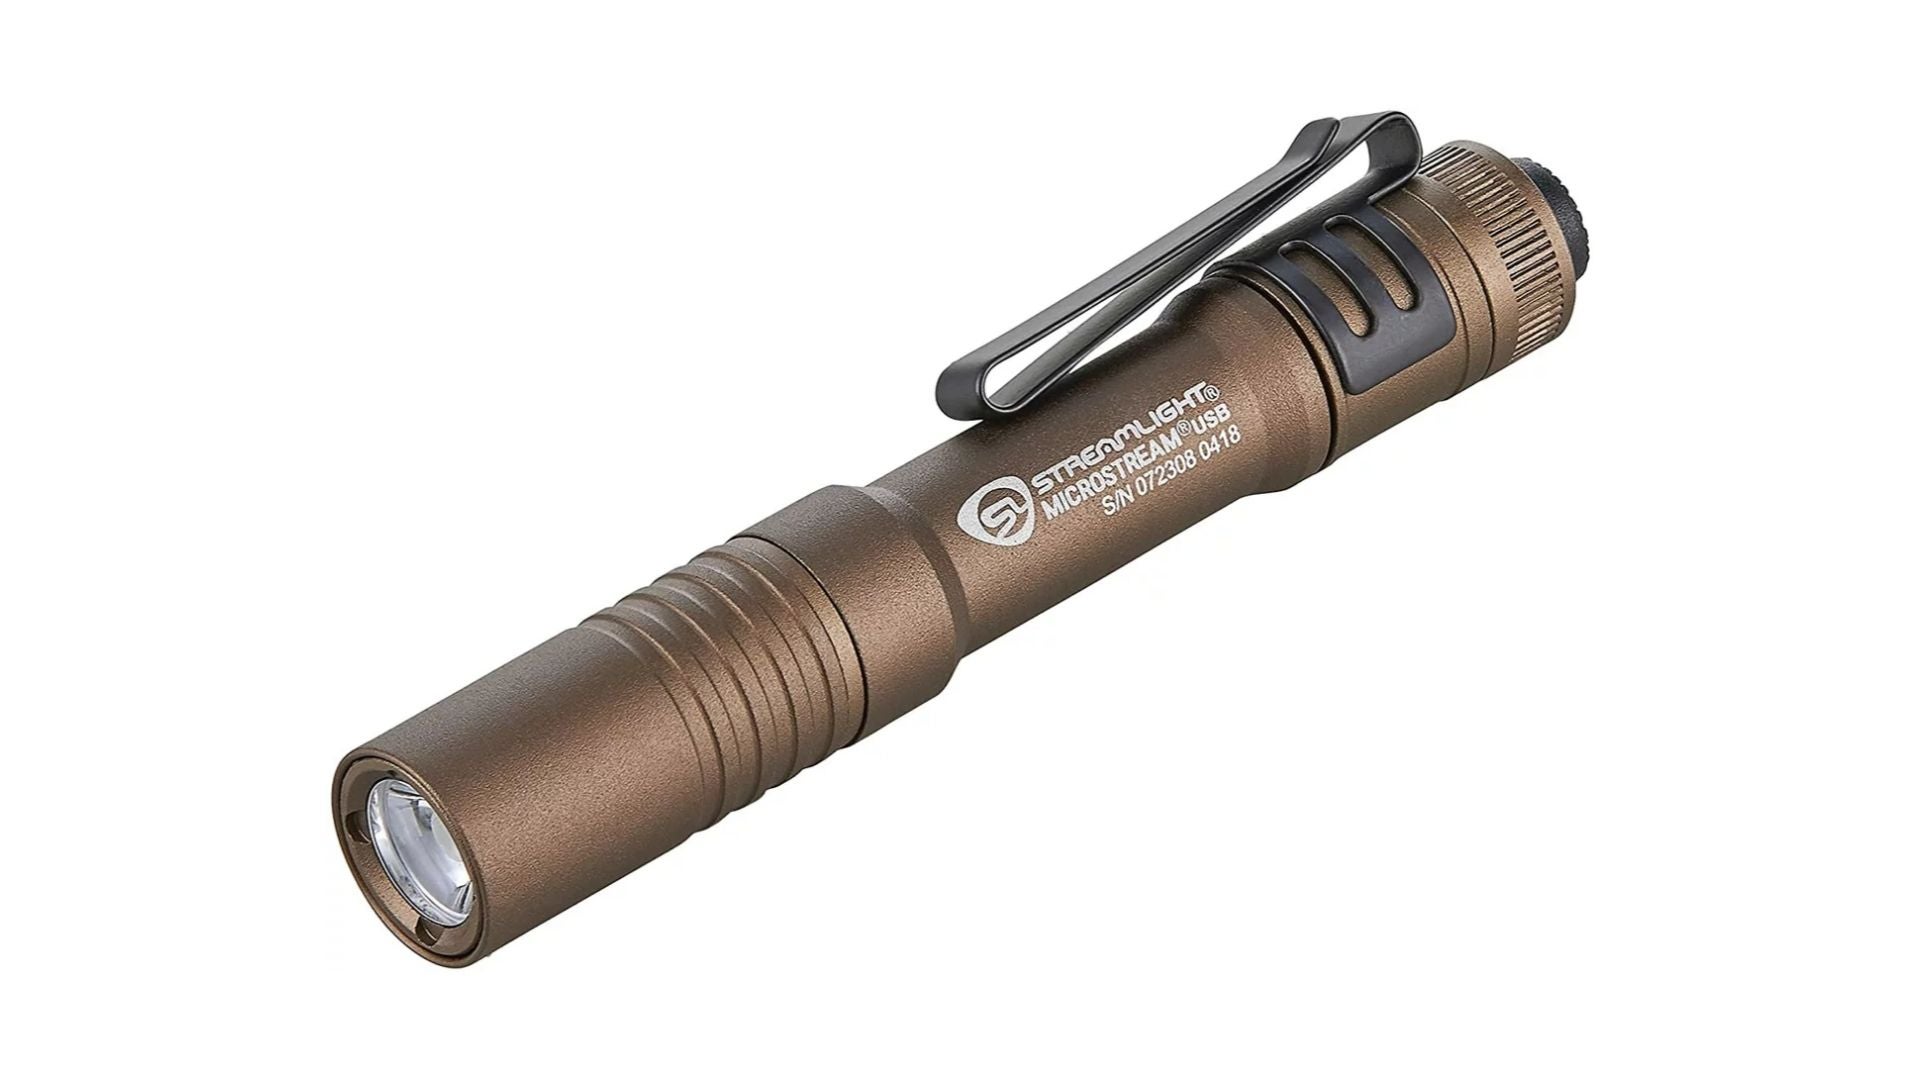 SIXRAY 600 Lumens Rail Mount Tactical Flashlight with Two CR123A Batteries and Charger for Picatinny MIL-STD-1913 and Glock Mini Compact LED Pistol Light FDE 